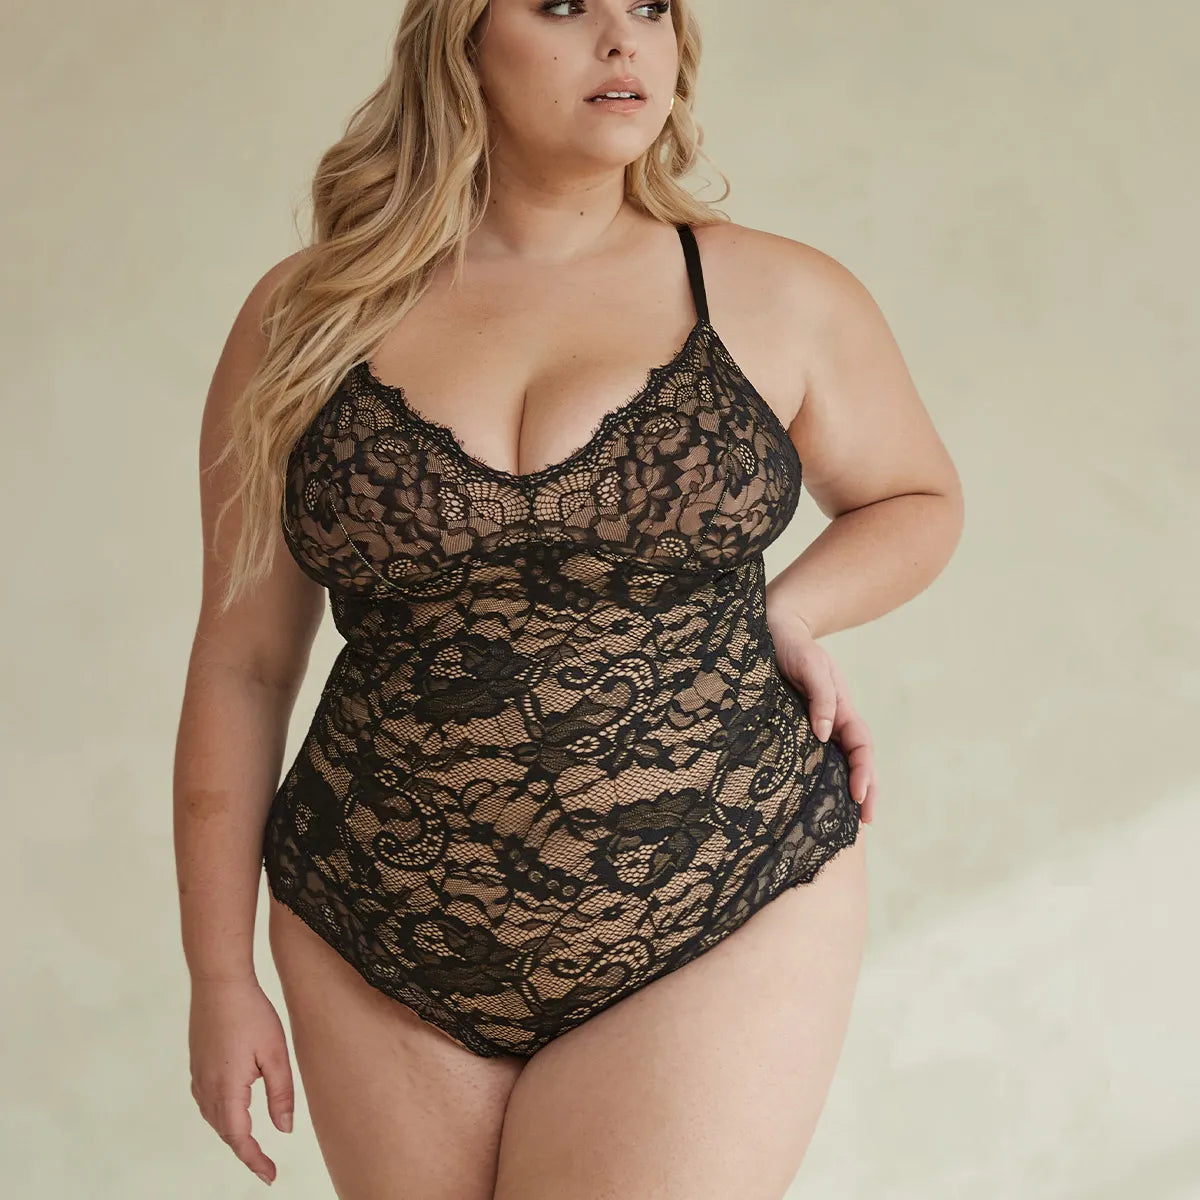 Gorgeous gorgeous girls wear @pinsyshapewear ⠀⠀ @camdanielle in our  Smoothing Lace Bodysuit size XL 🖤 The control panel in the mid